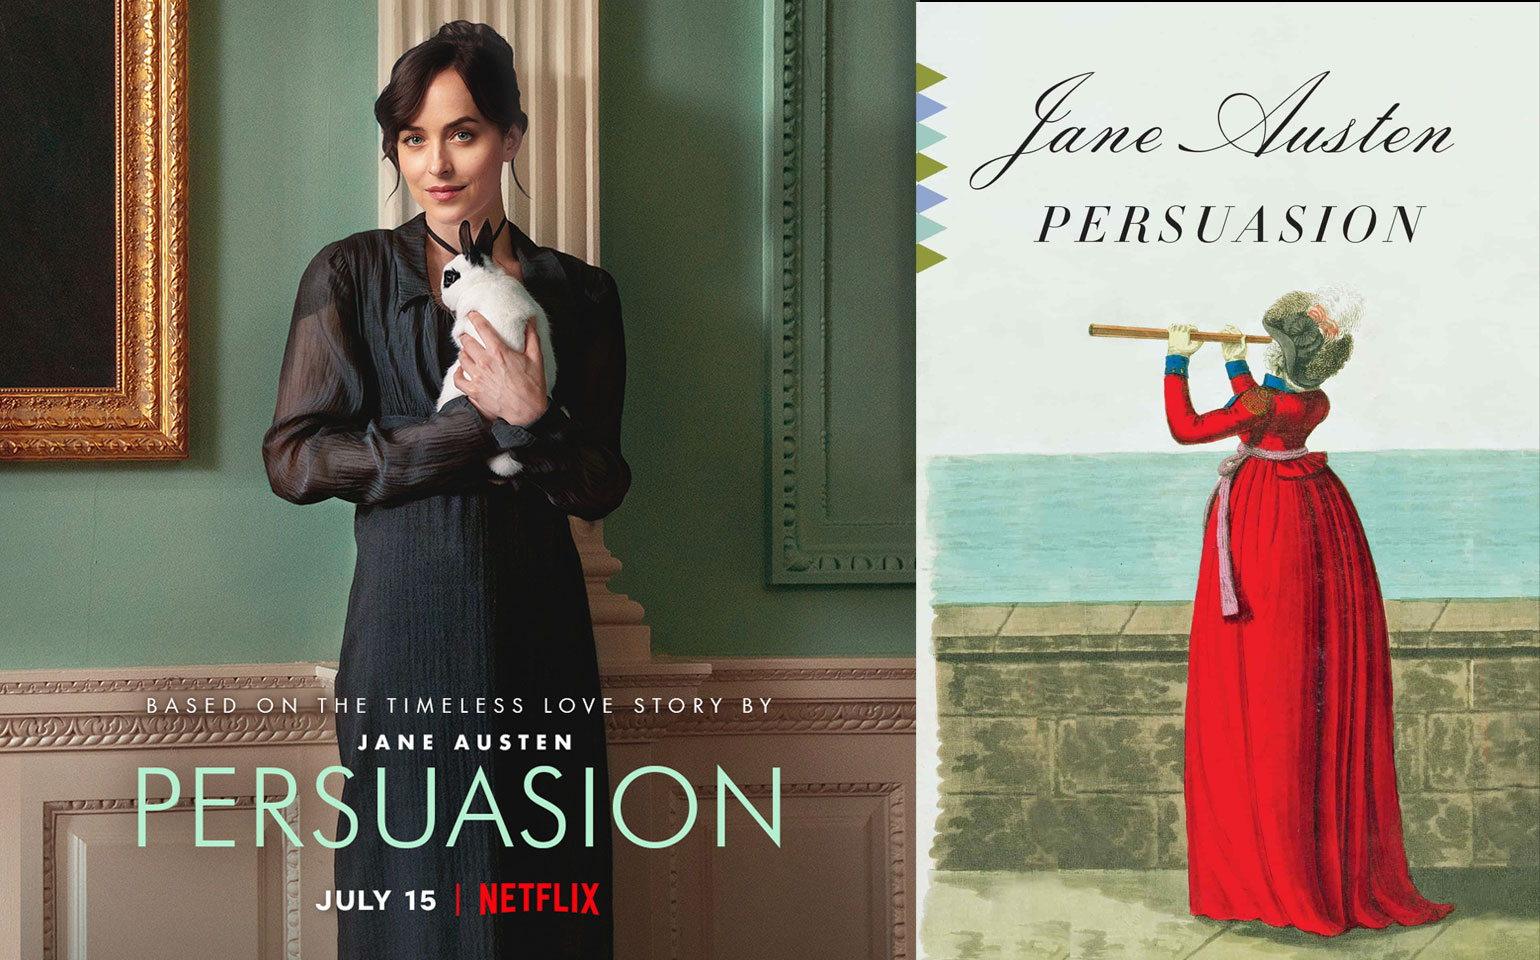 The Netflix poster for Persuasion and the novel cover for Persuasion are shown side by side.